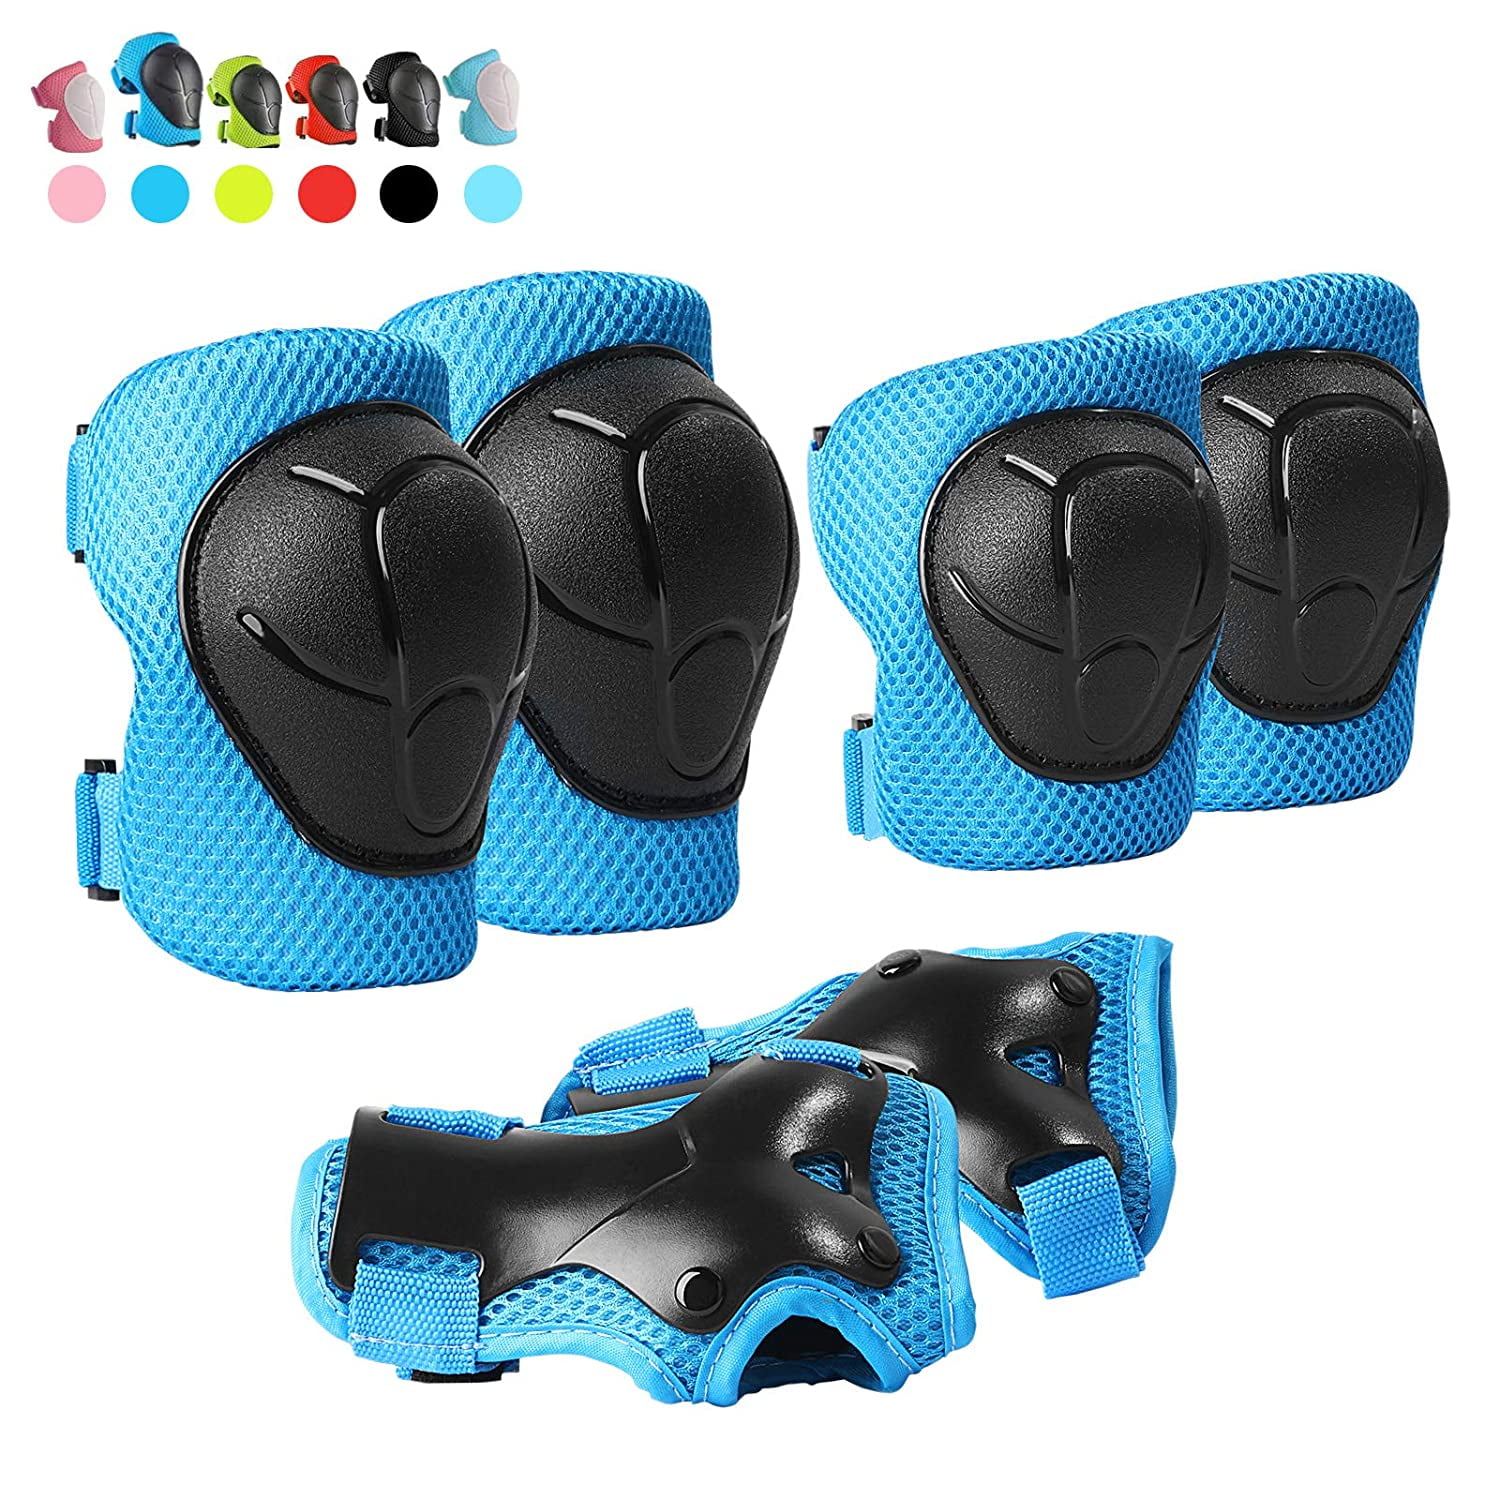 Safety Gear for Kids 3-8 Years Old Kids Youth Knee Pad Elbow Pads Wrist Guards 